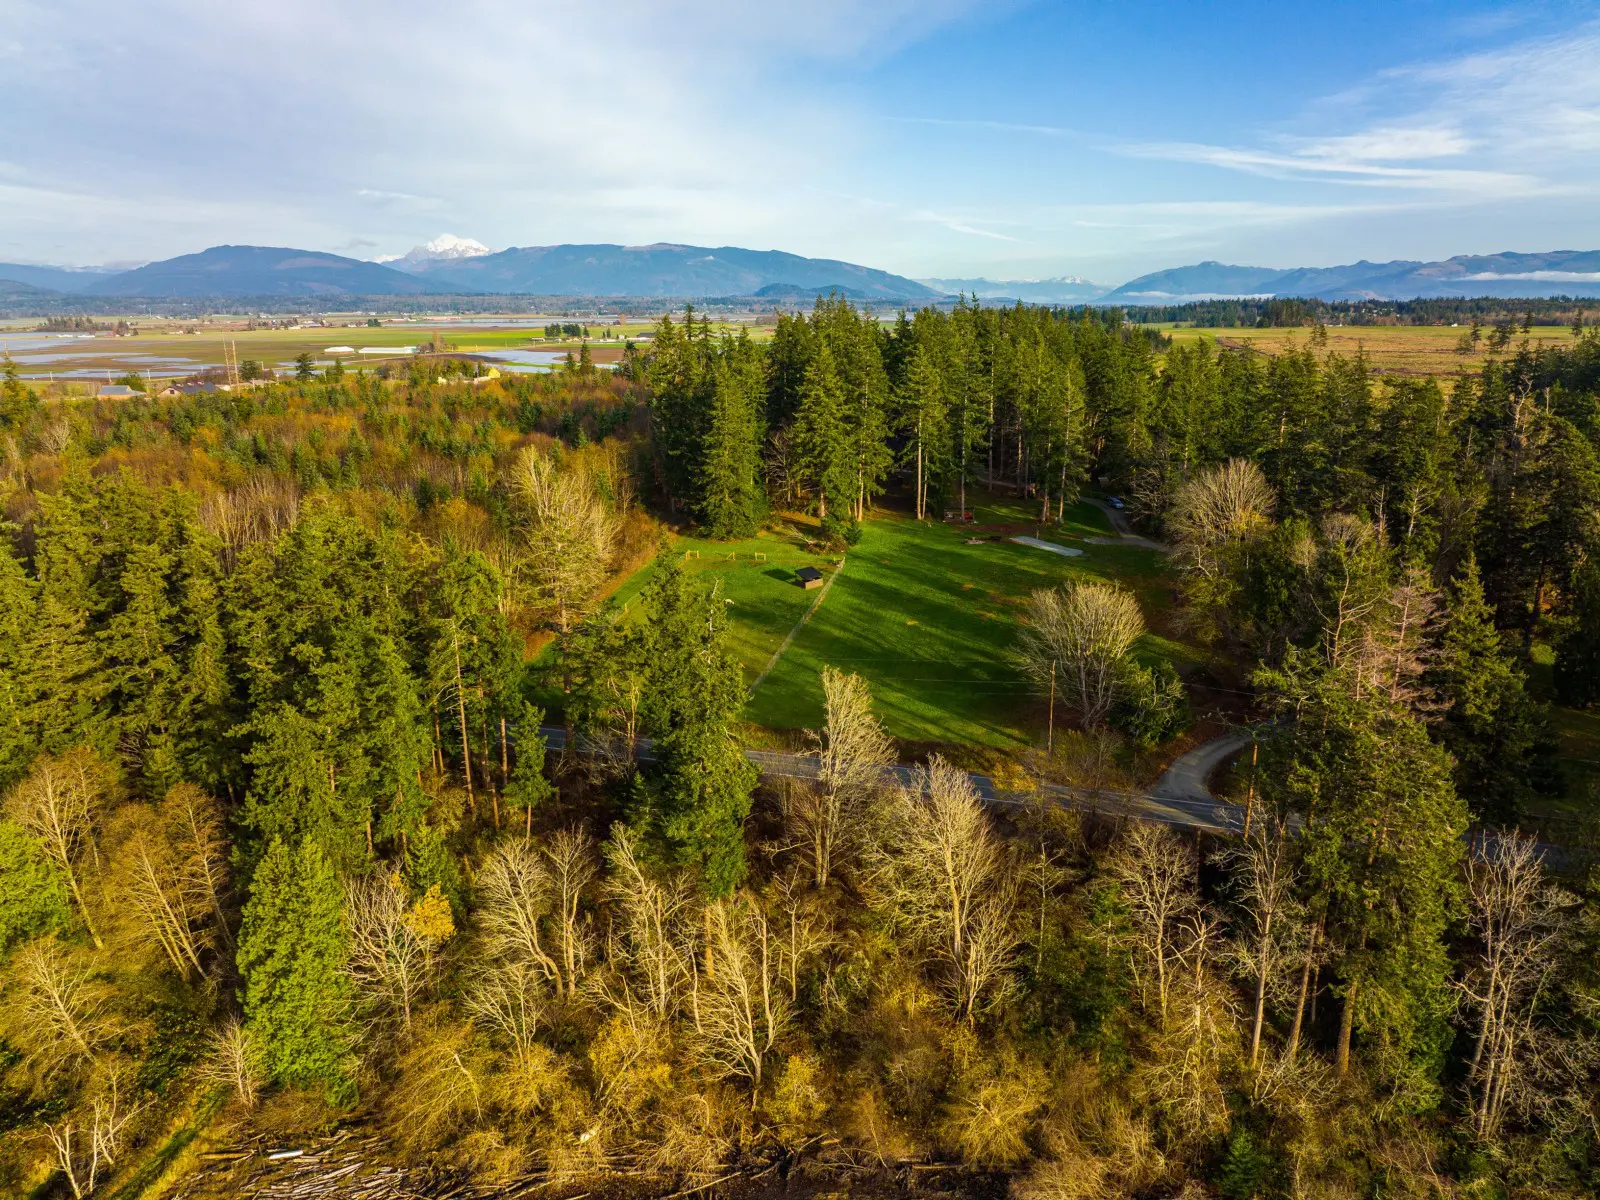 <h5><a href="https://www.rsir.com/homes-for-sale/9443-bayview-edison-road-bow-wa-98232-1941644-1294977/">10.03 Acres in Bow, Just Steps from Padilla Bay</a></h5>